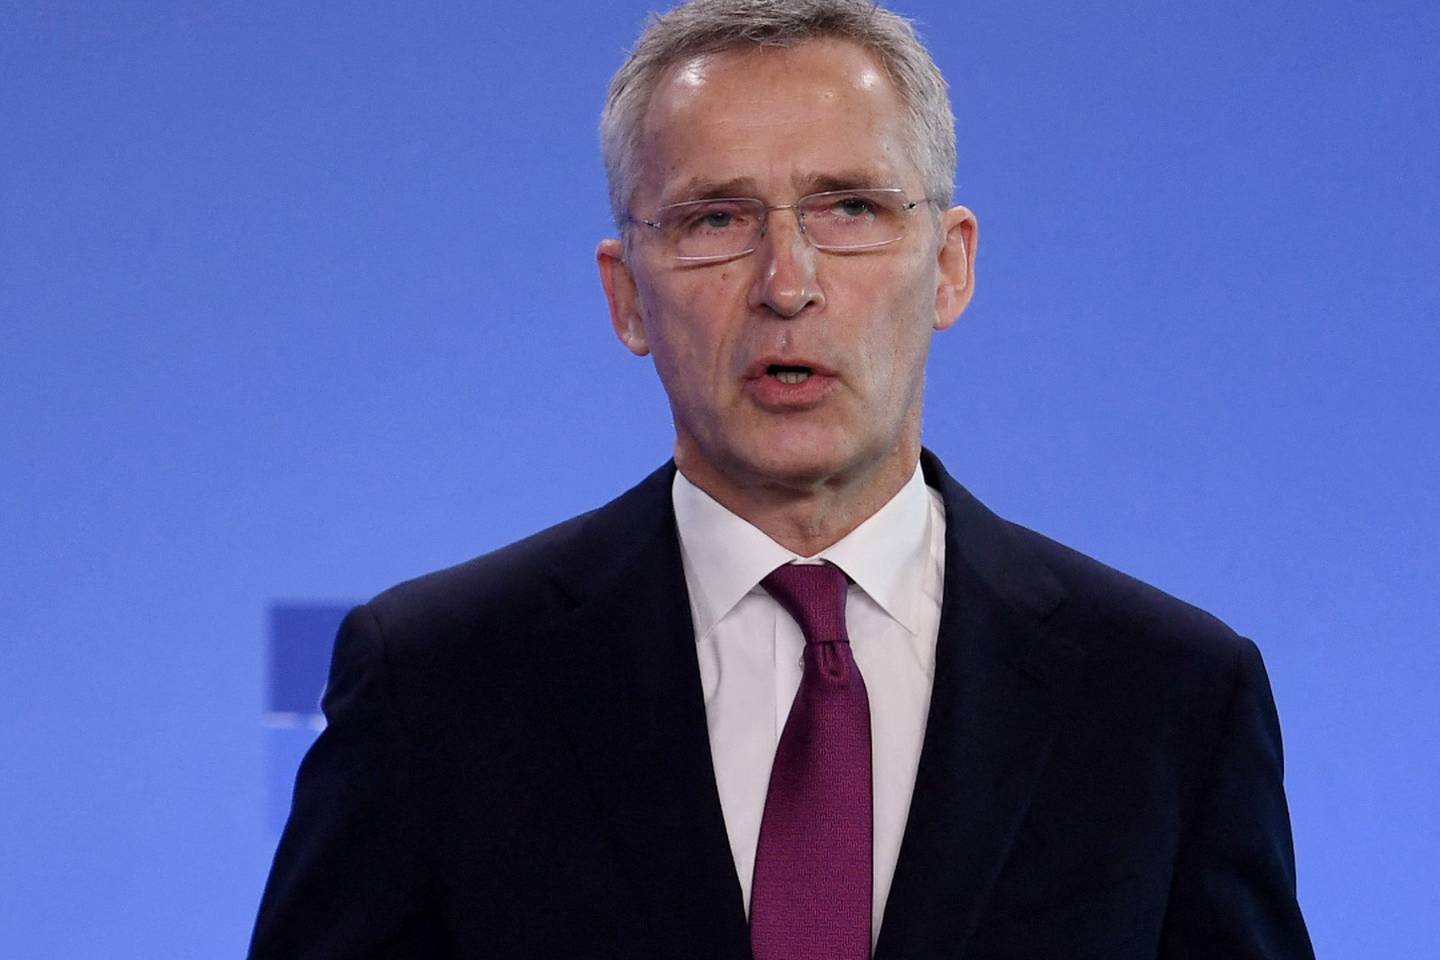 Head of Nato condemns Russia’s attack on Ukrainian nuclear power plant